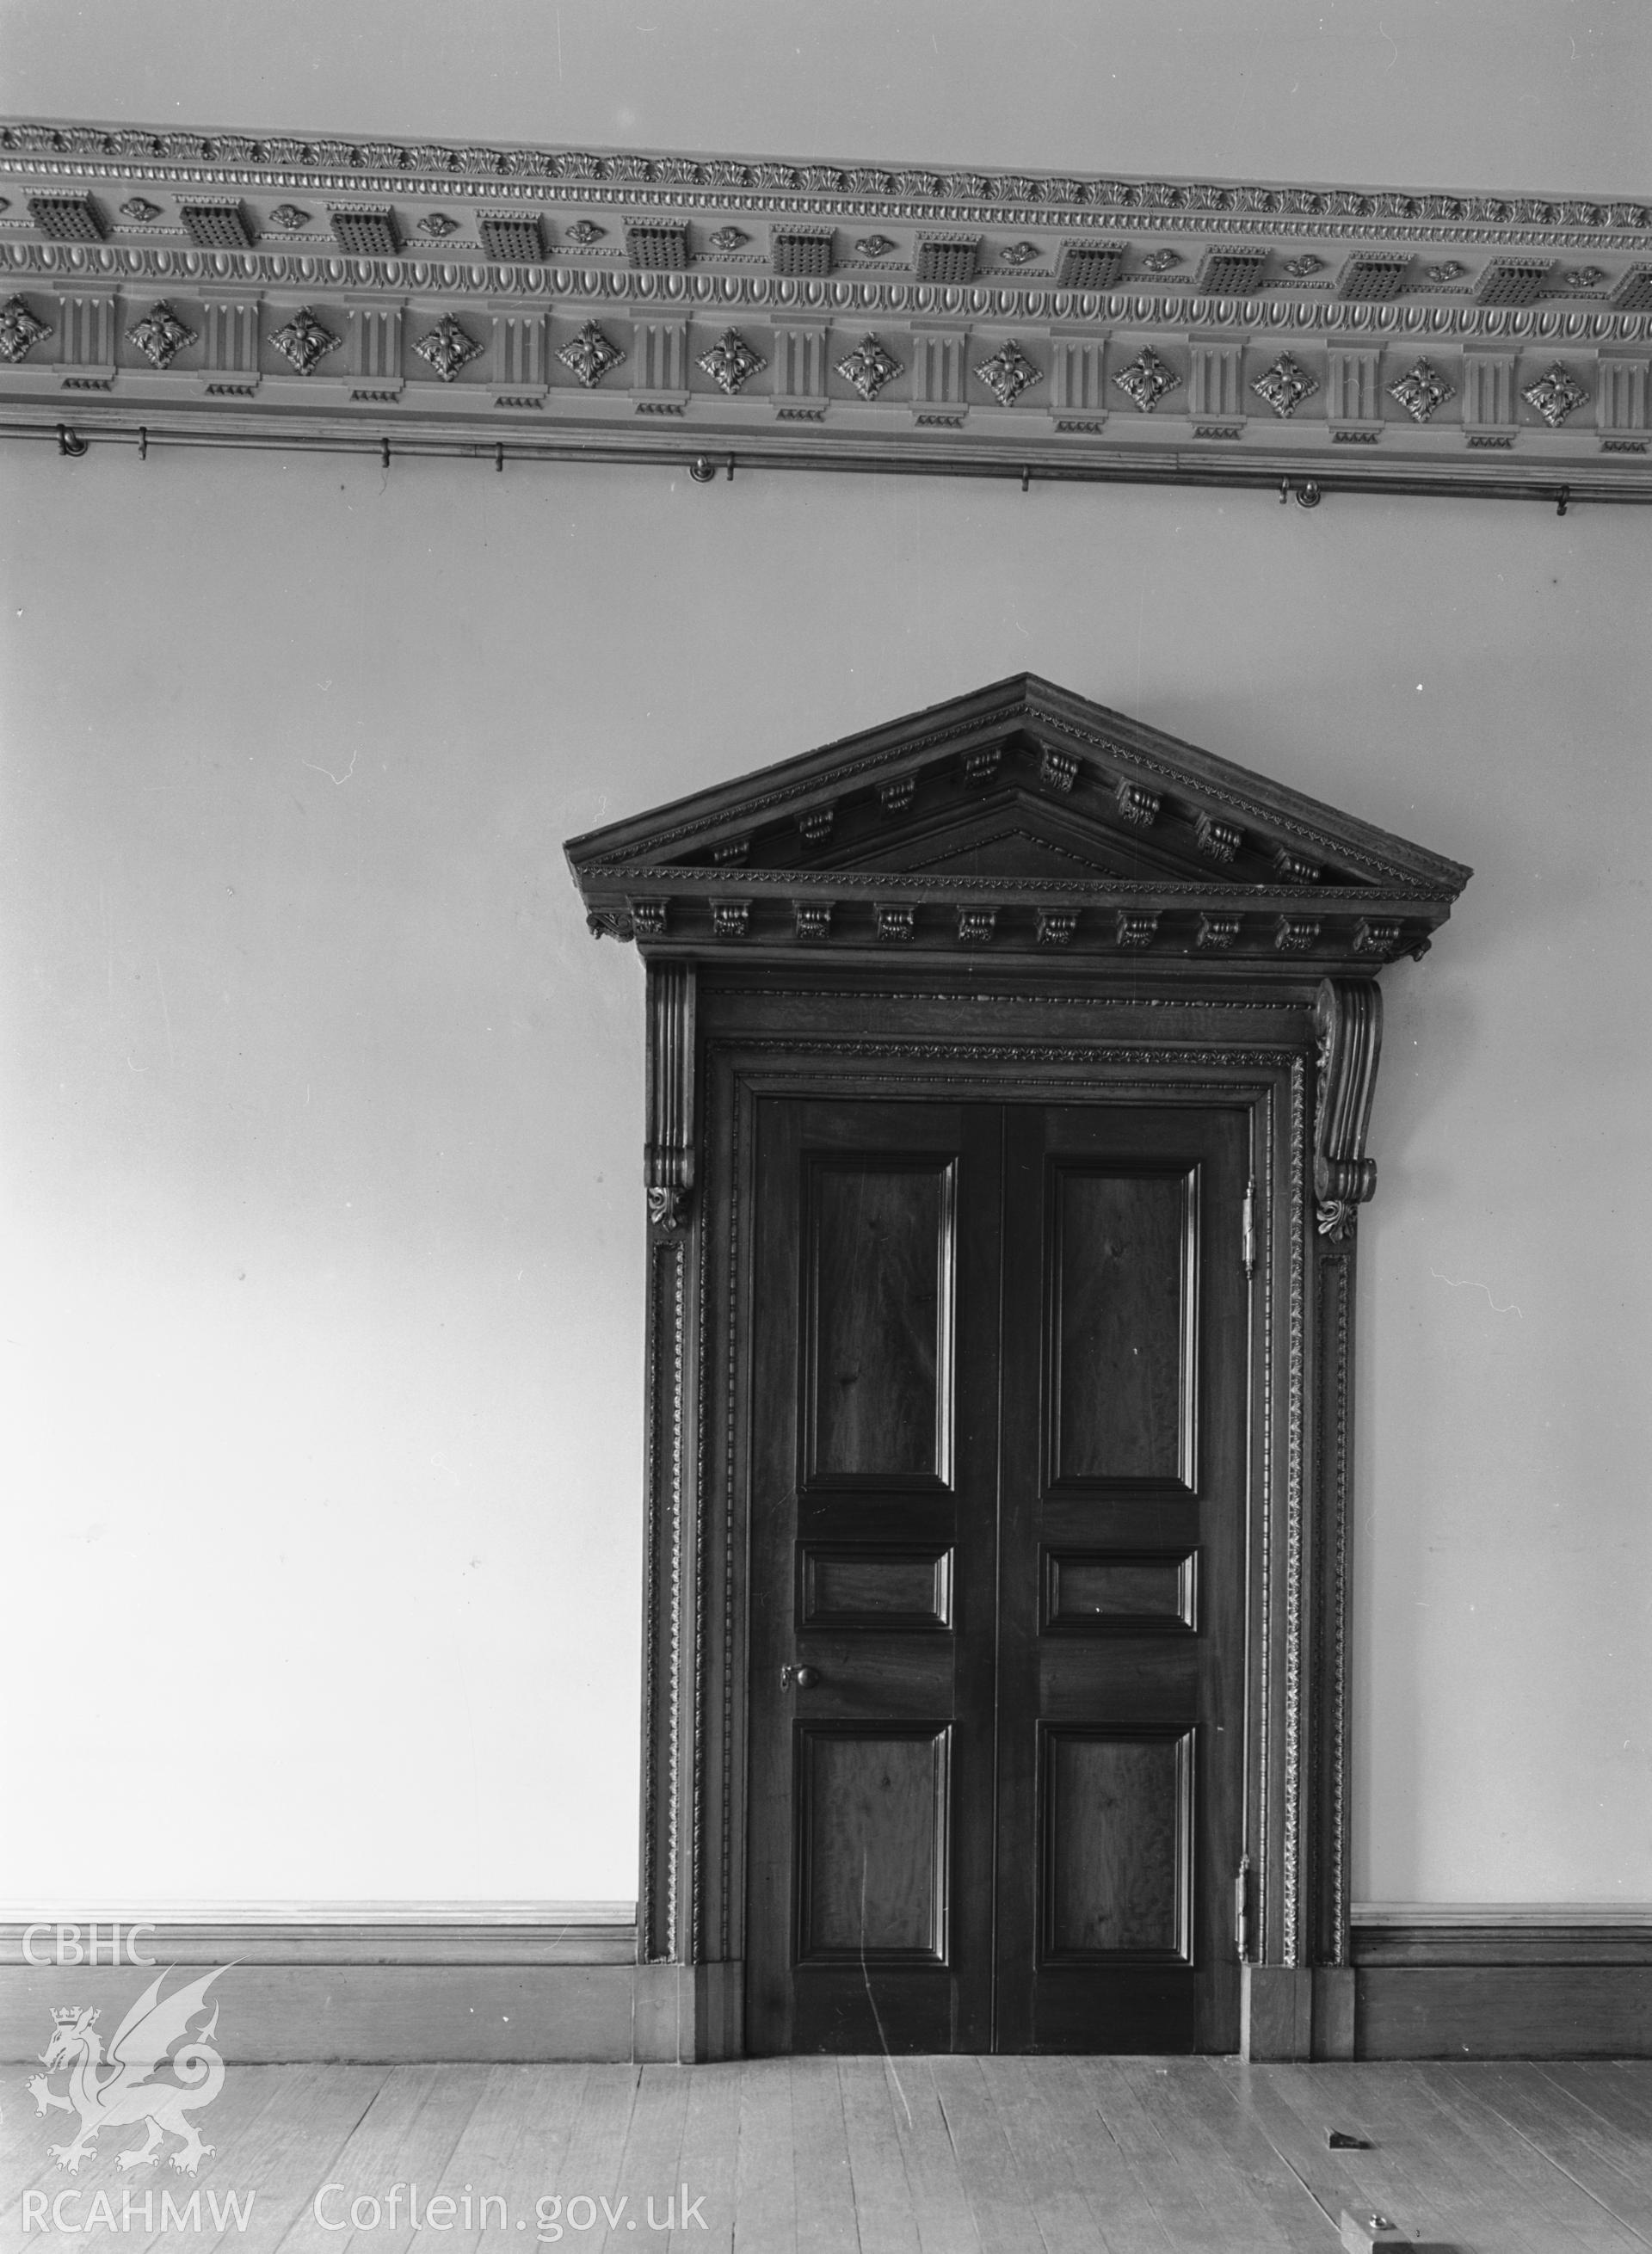 Interior view showing door and cornice in drawing room at Glynllifon Hall